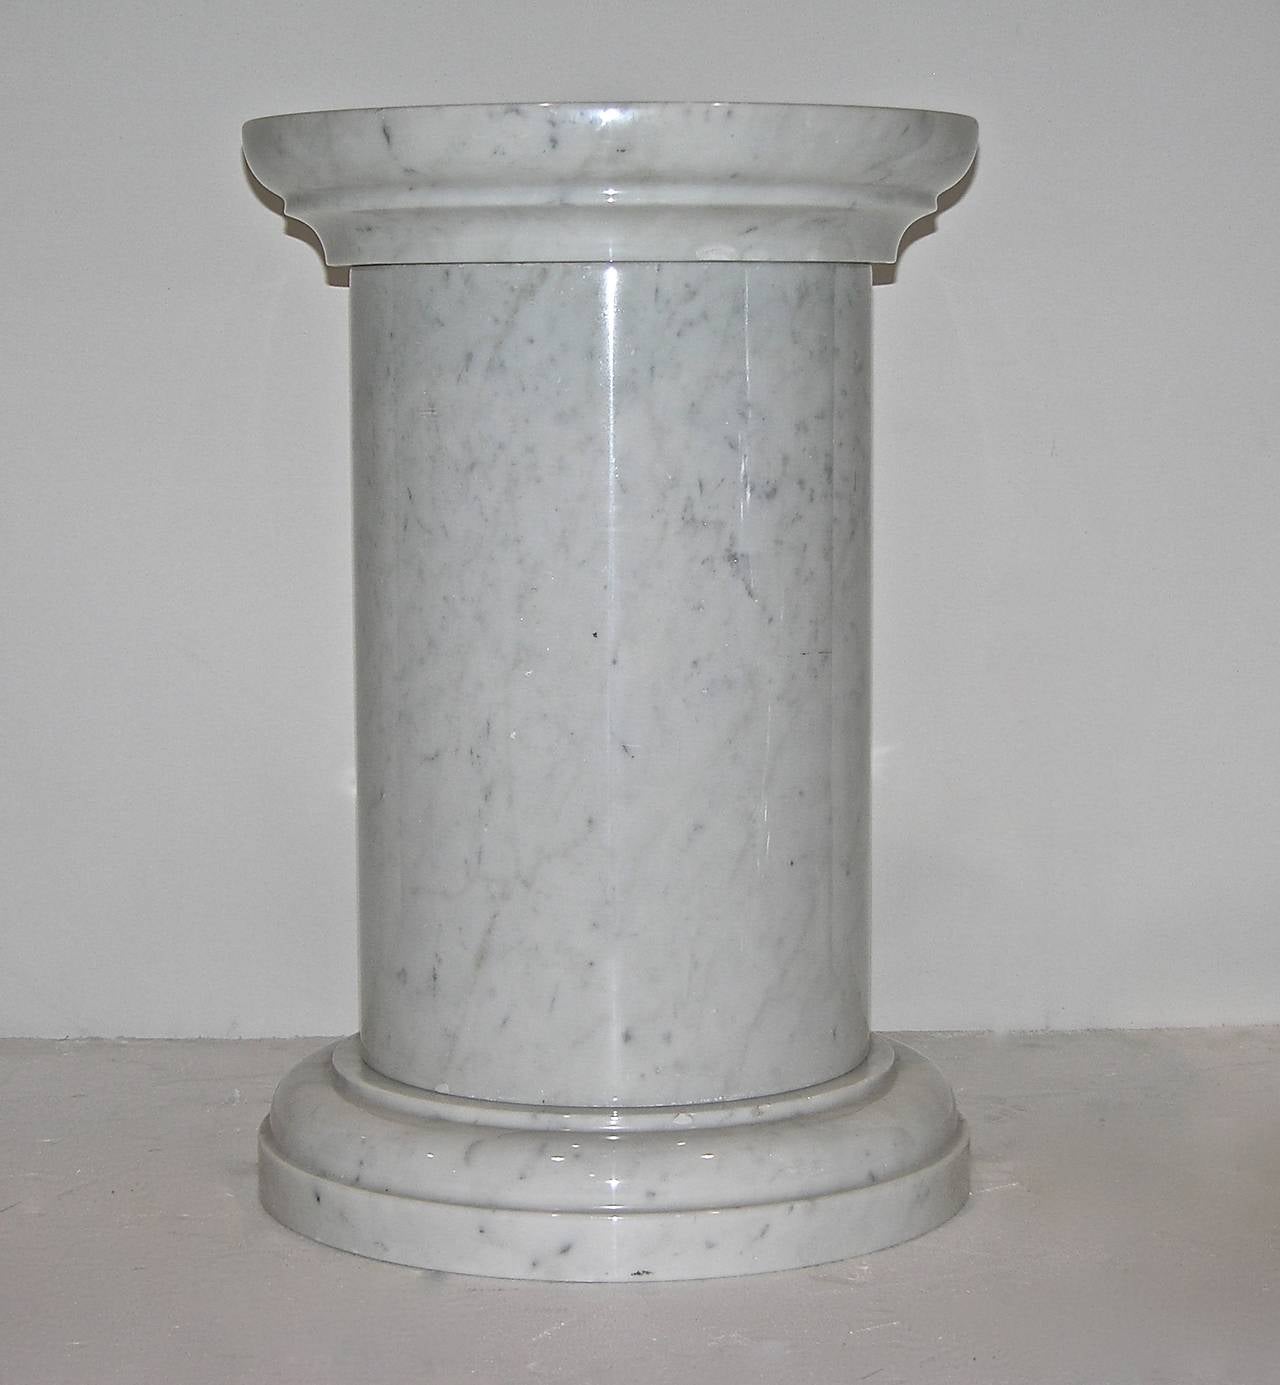 Hand-Crafted Italian Rare Pair of Late Art Deco Black and White Urns on Carrara Columns